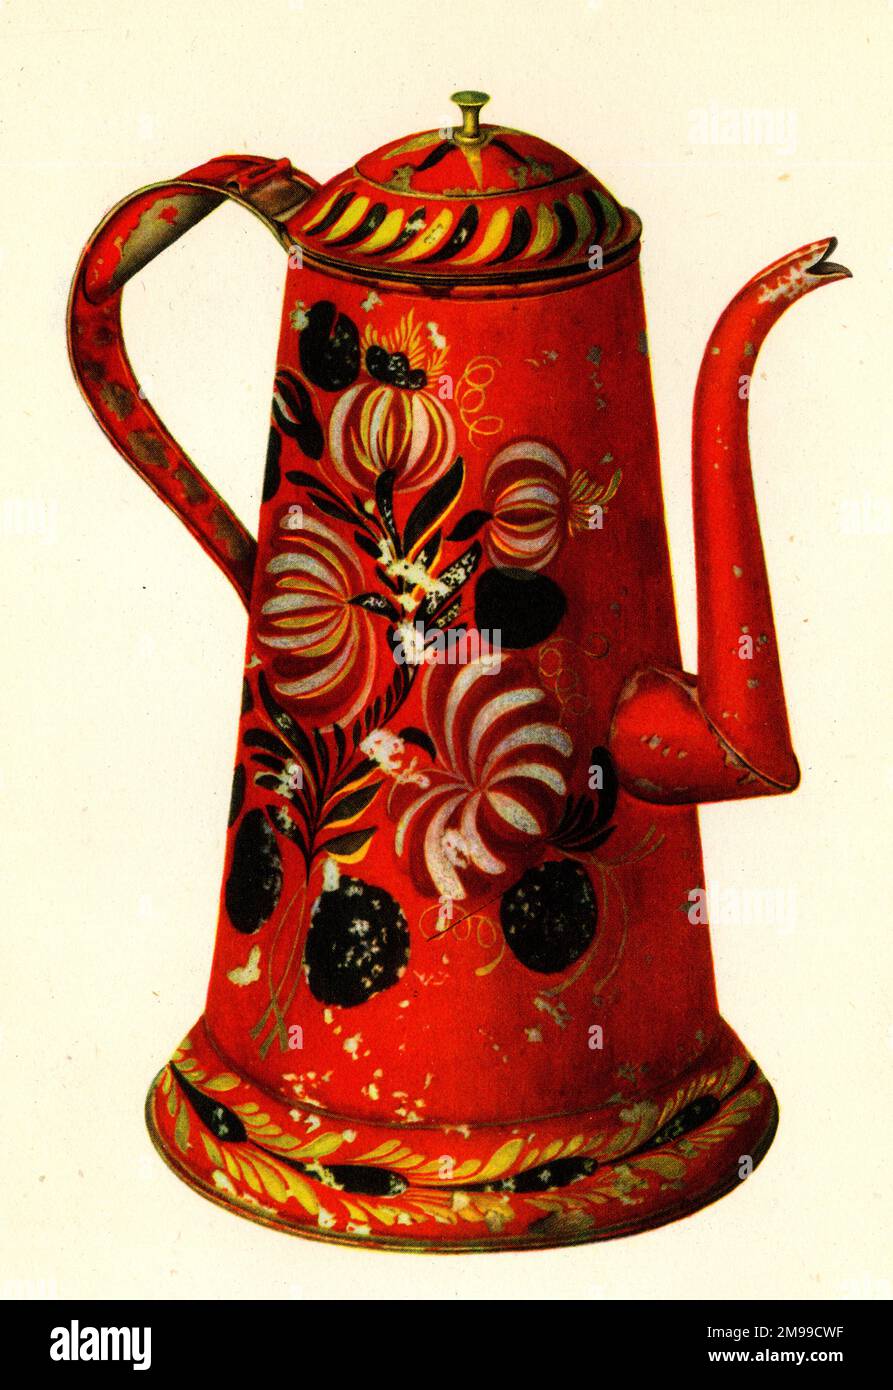 Popular Art in the USA - Toleware coffee pot, hand painted. Stock Photo